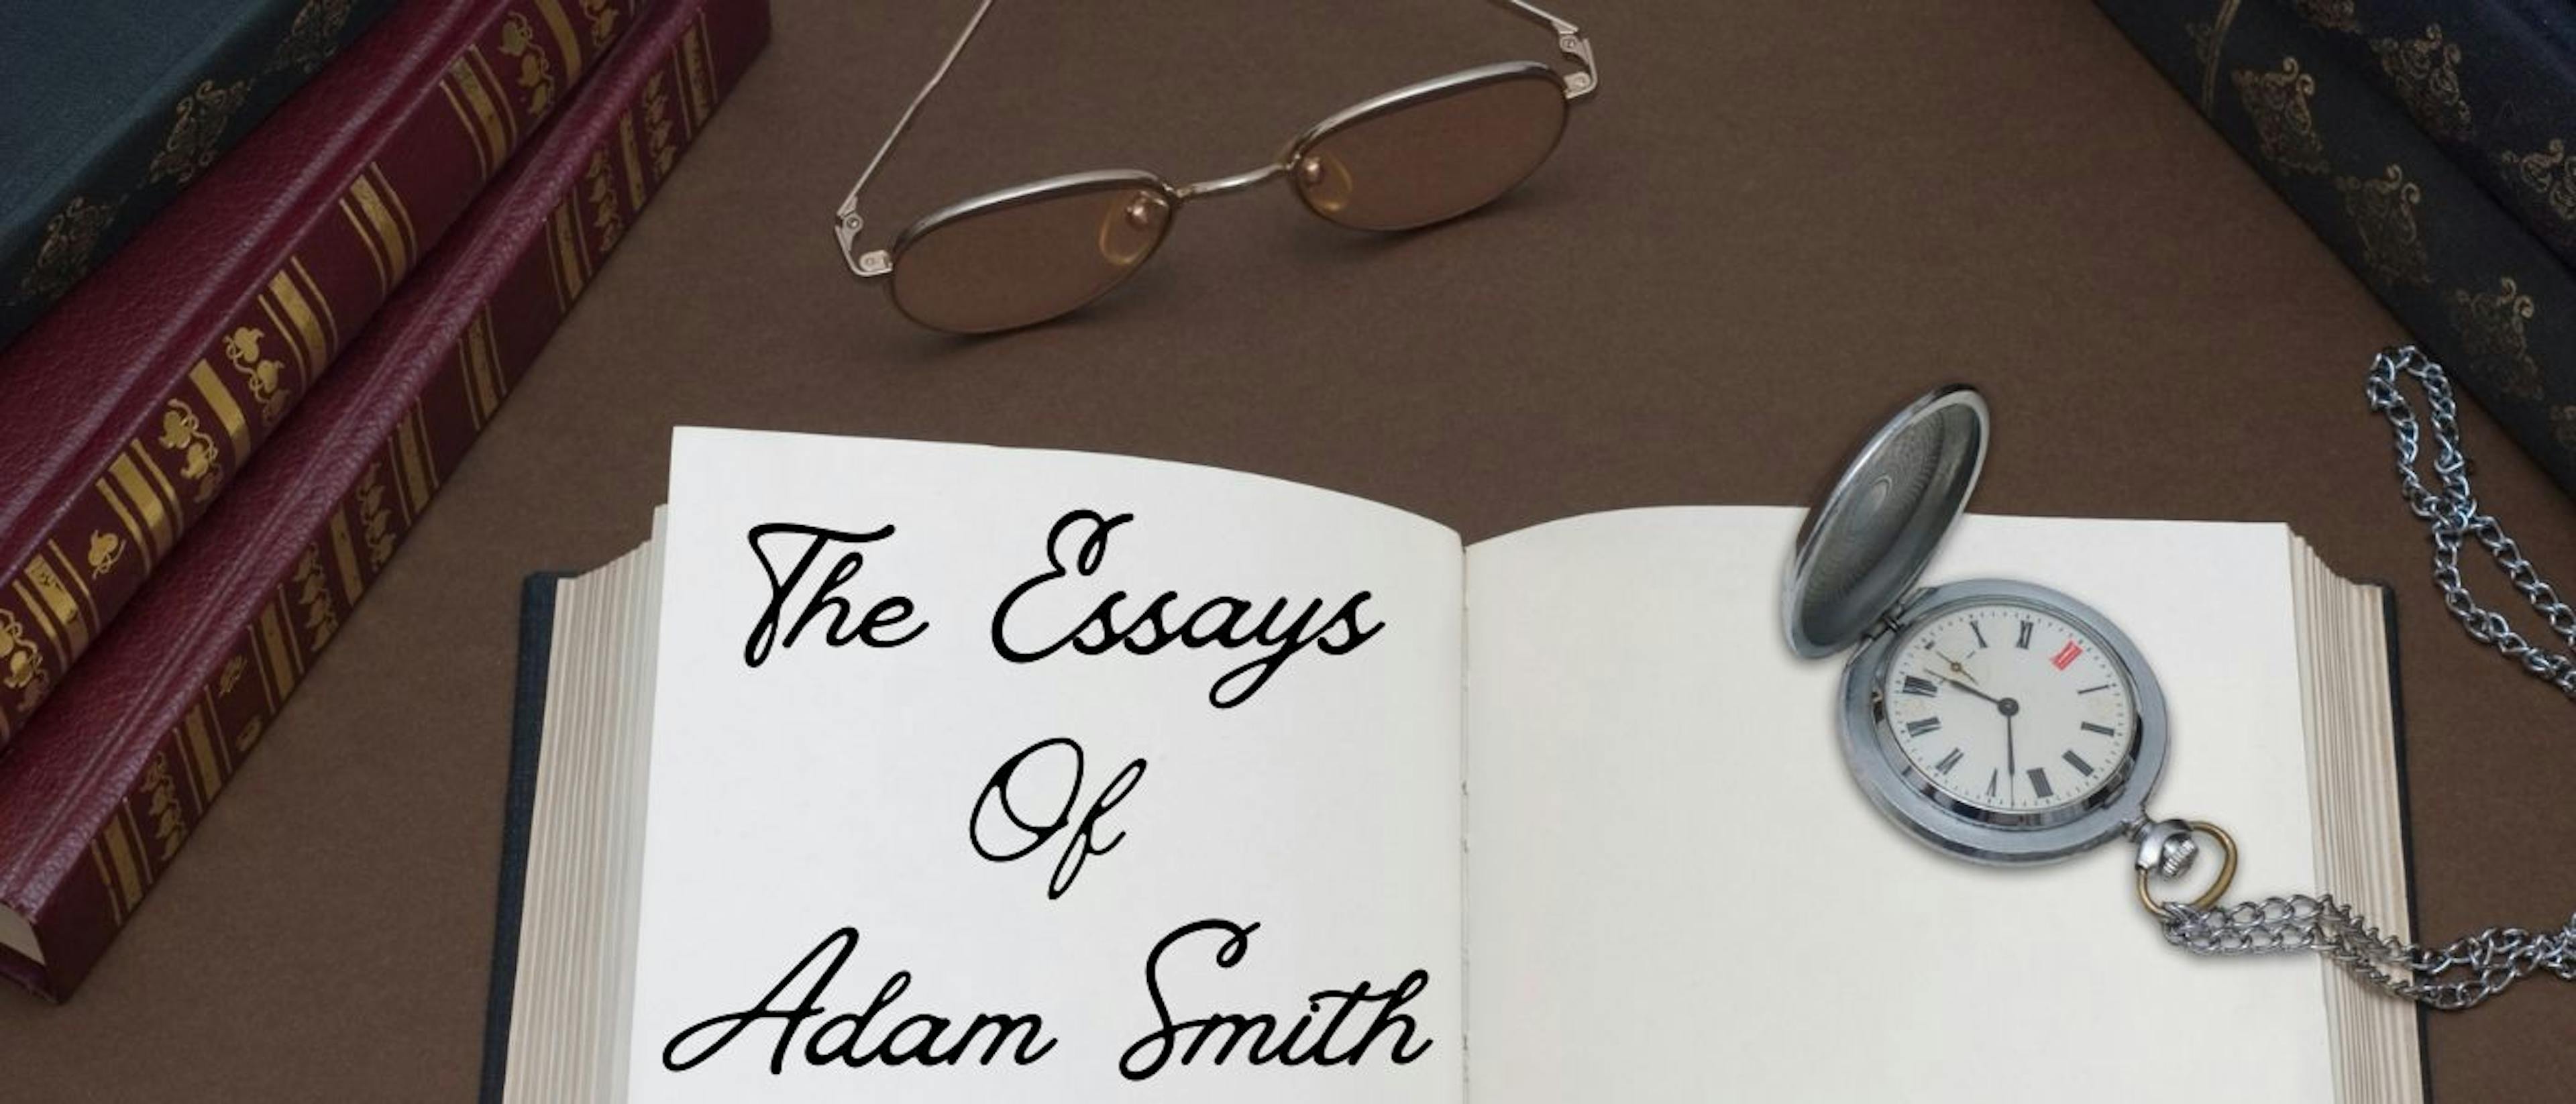 featured image - The Essays of Adam Smith: Part V, Chapter I